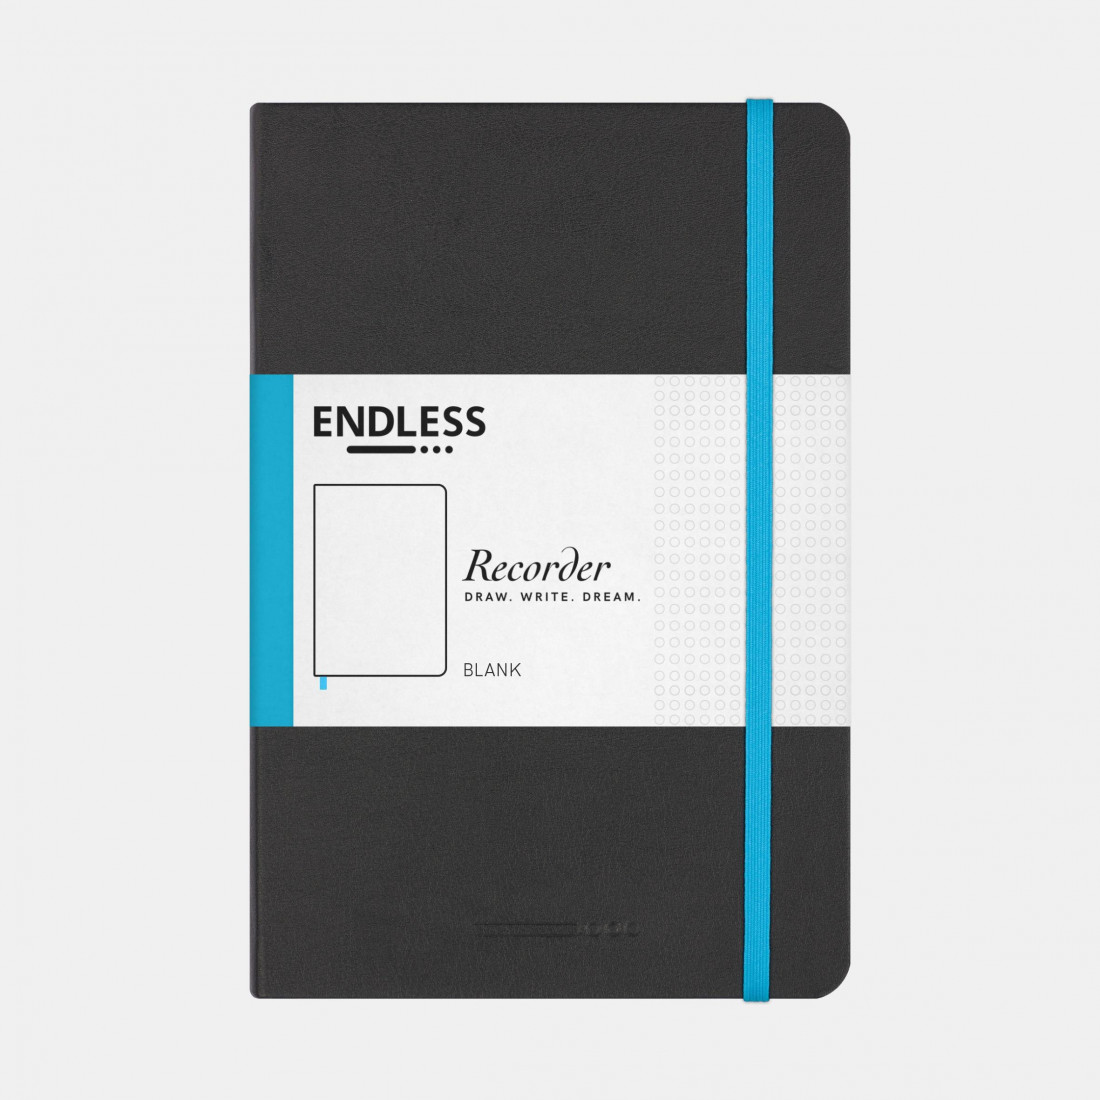 Endless notebook 15x21 black blank with 68 gsm Tomoe River paper